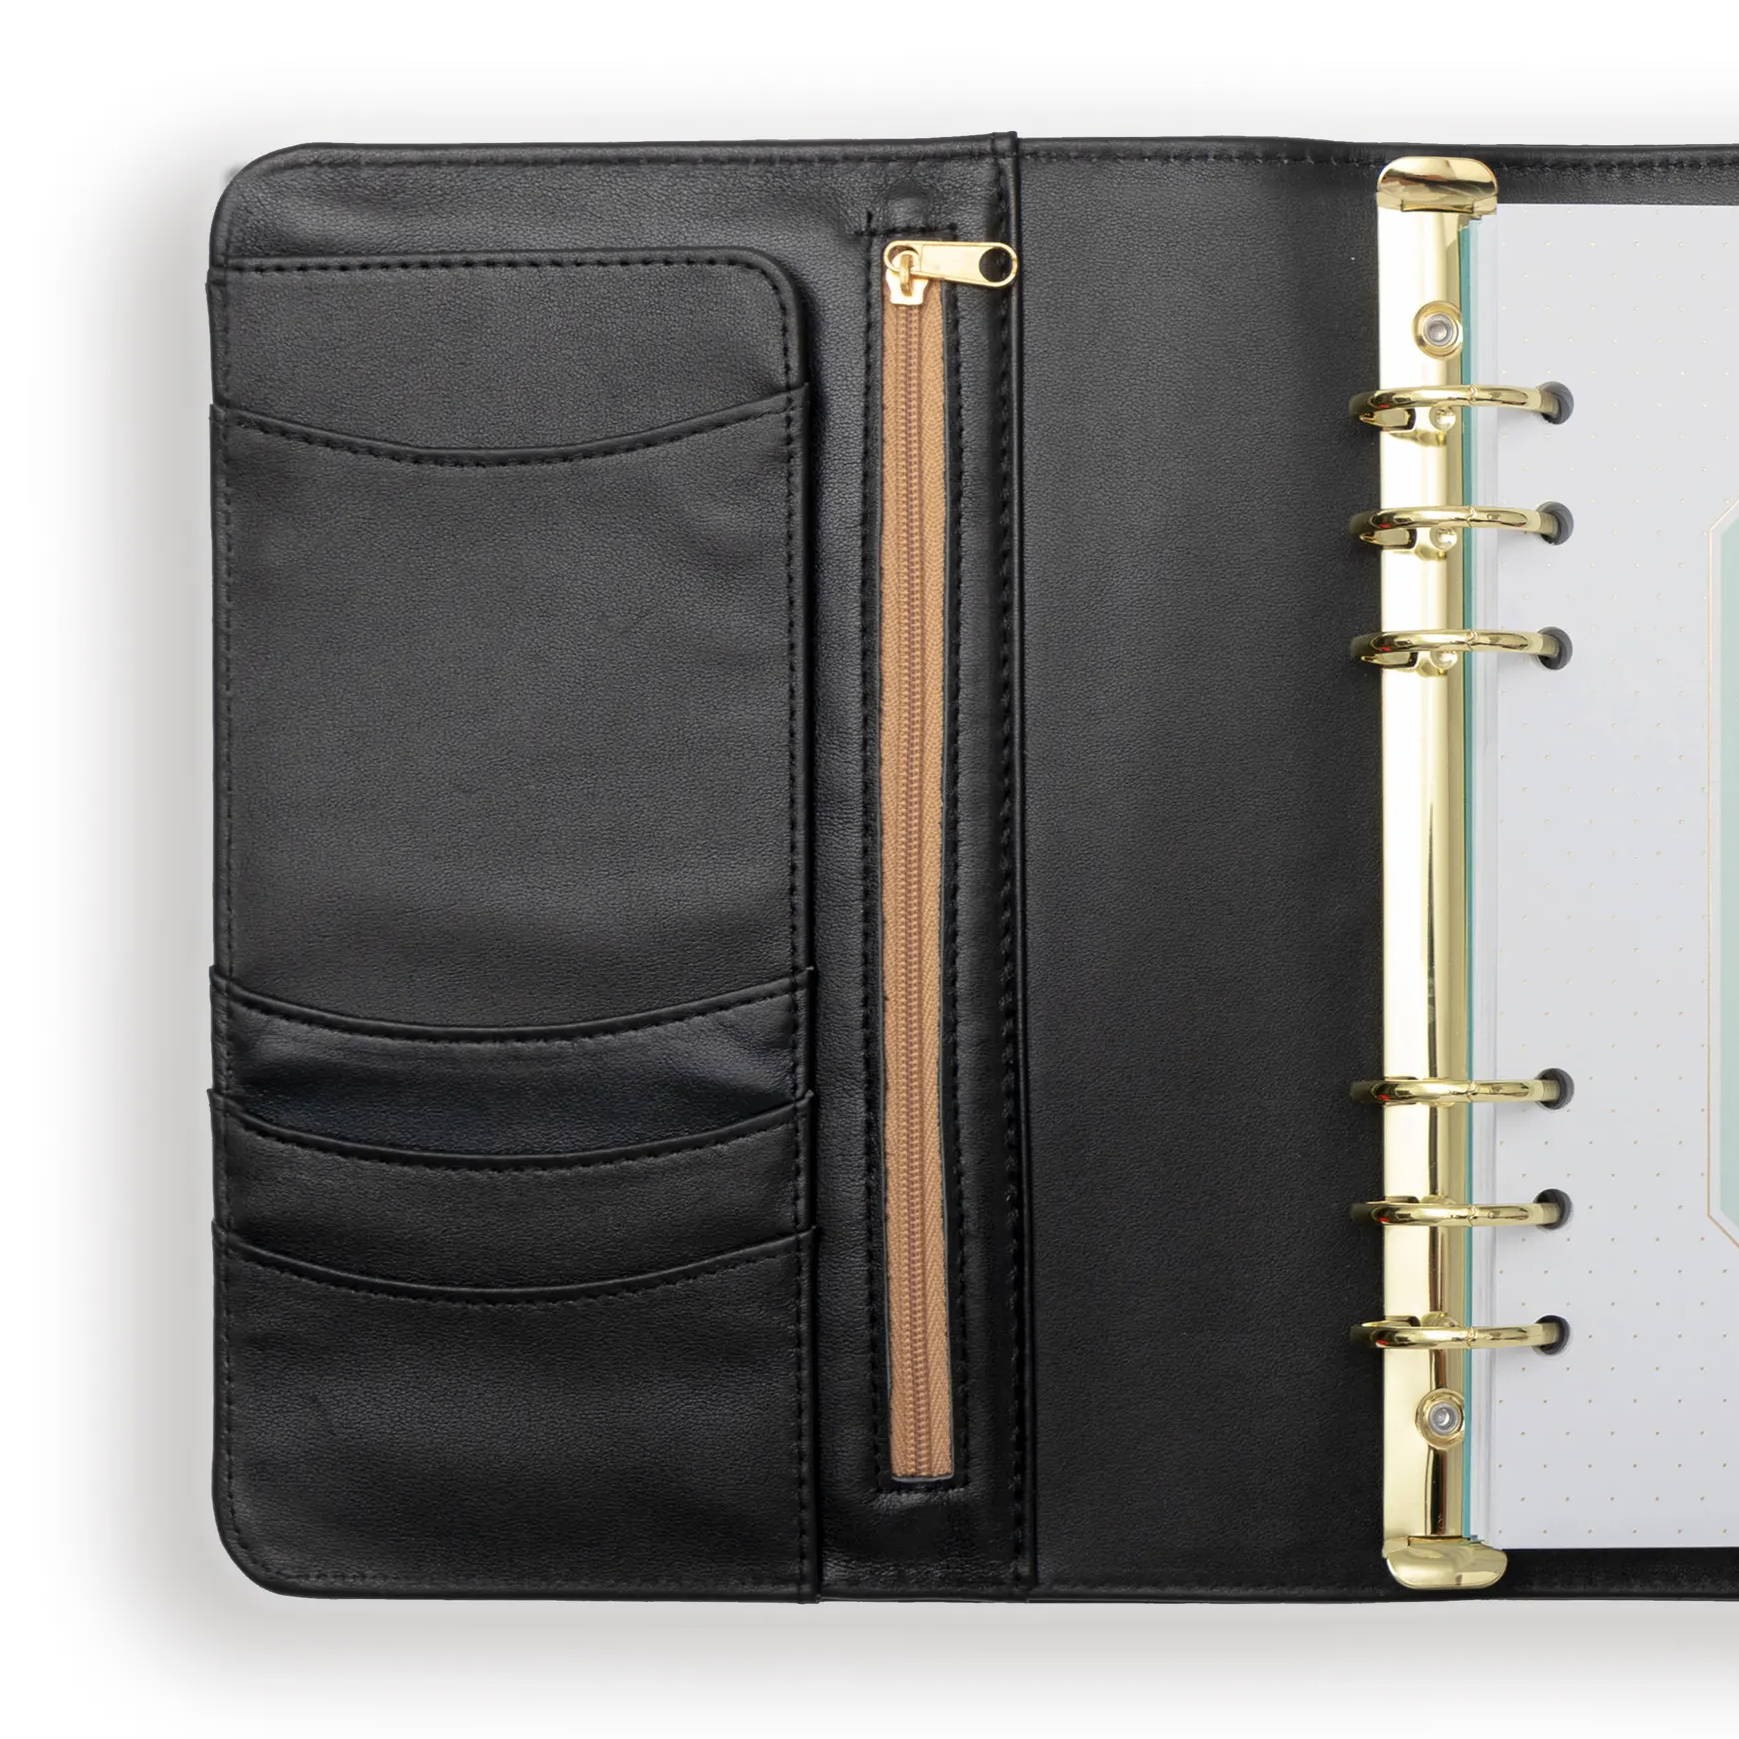 black a5 planner, open to show pockets, gold zipper pouch, binder rings with pages attached